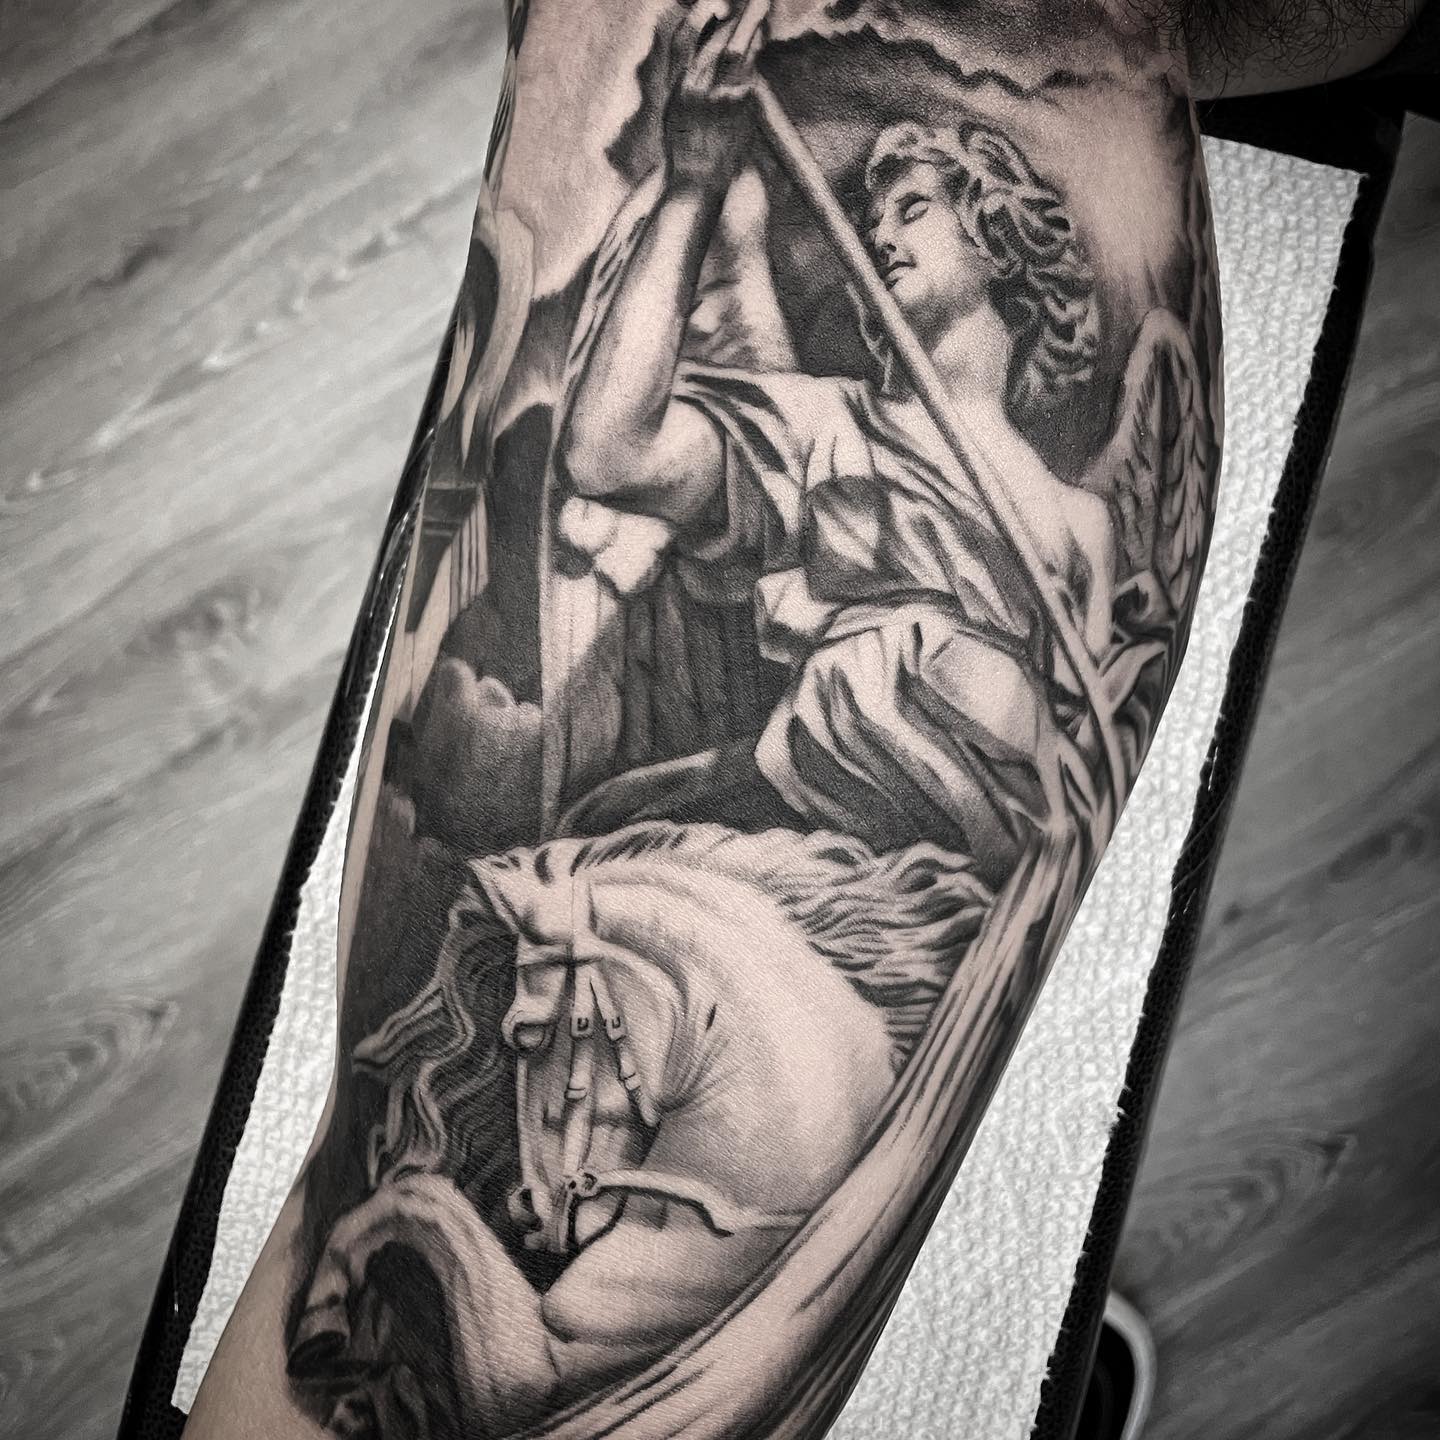 Watchtower Tattoo Company - Finished St. George tattoo done by J.J. @j3ink  | Facebook